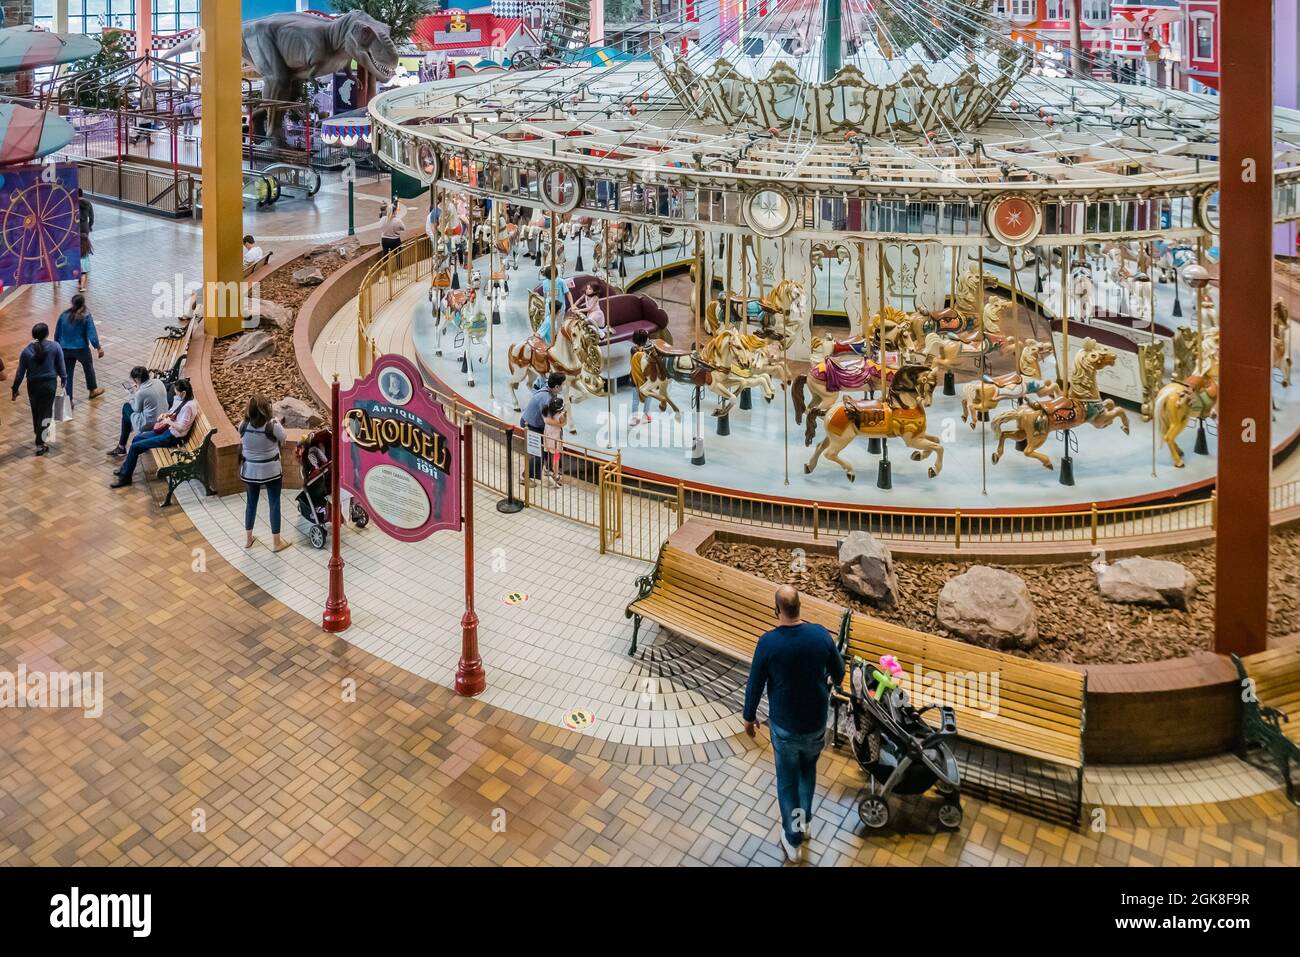 Fantasy fair is the largest indoor amusement park in Toronto Ontario Canada and it is located inside woodbine shopping mall Stock Photo